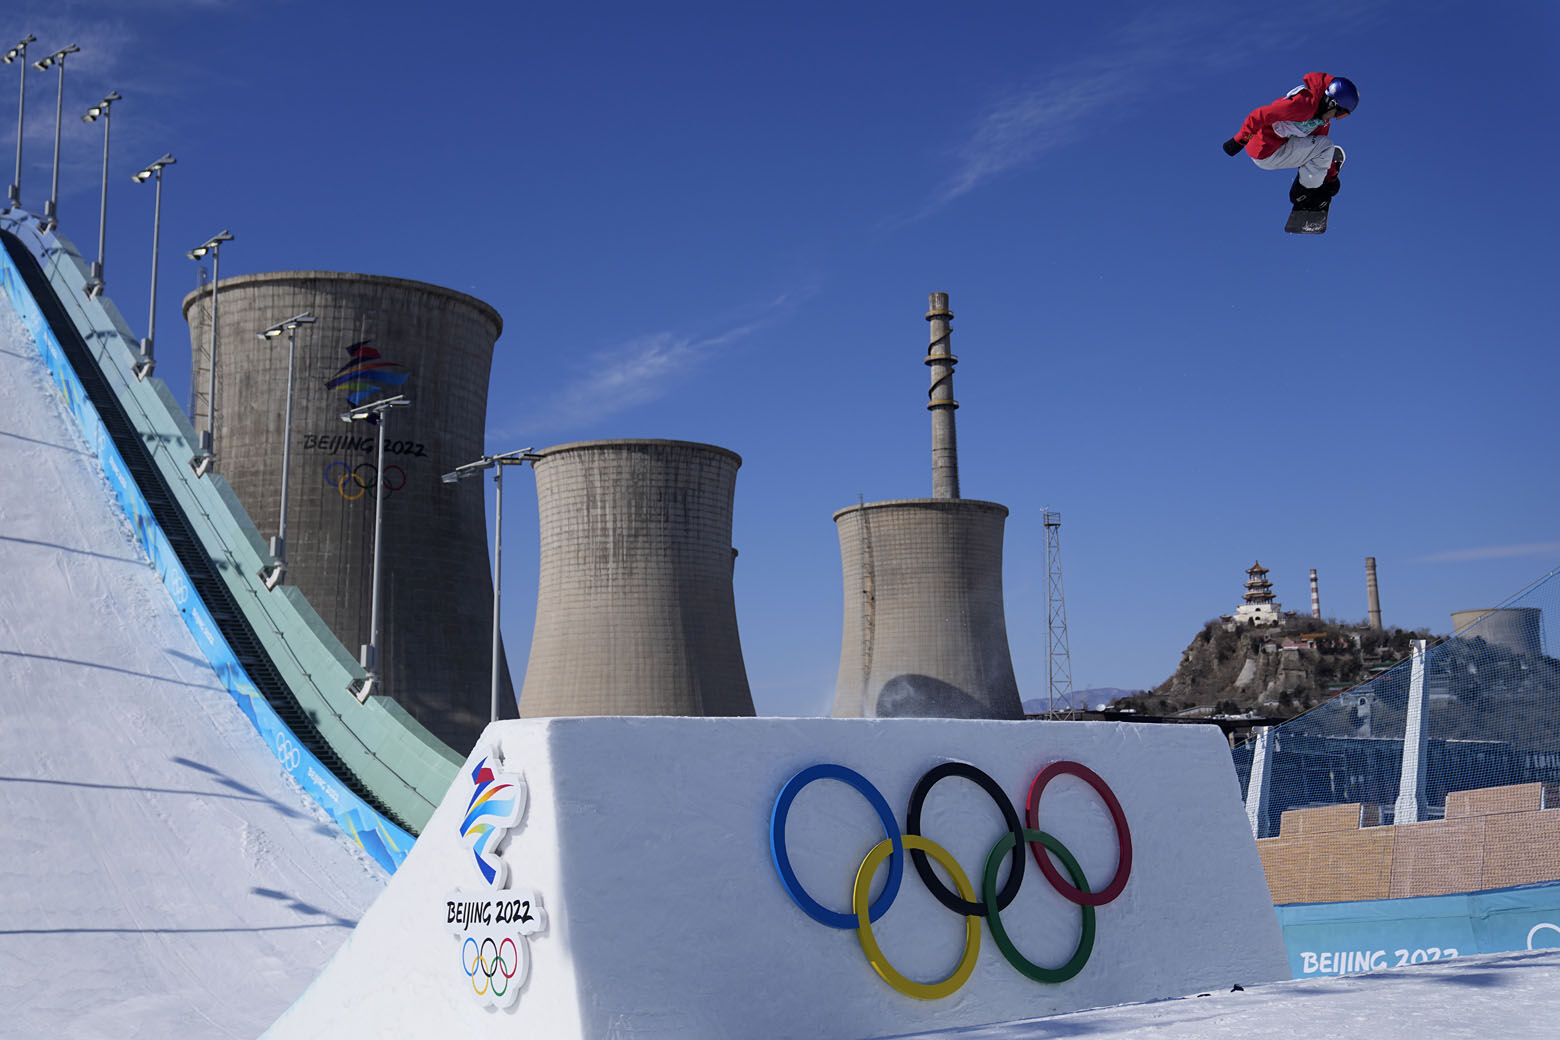 <p>Takeru Otsuka of Japan competes during the men&#8217;s snowboard big air qualifications of the 2022 Winter Olympics, Monday, Feb. 14, 2022, in Beijing.</p>
